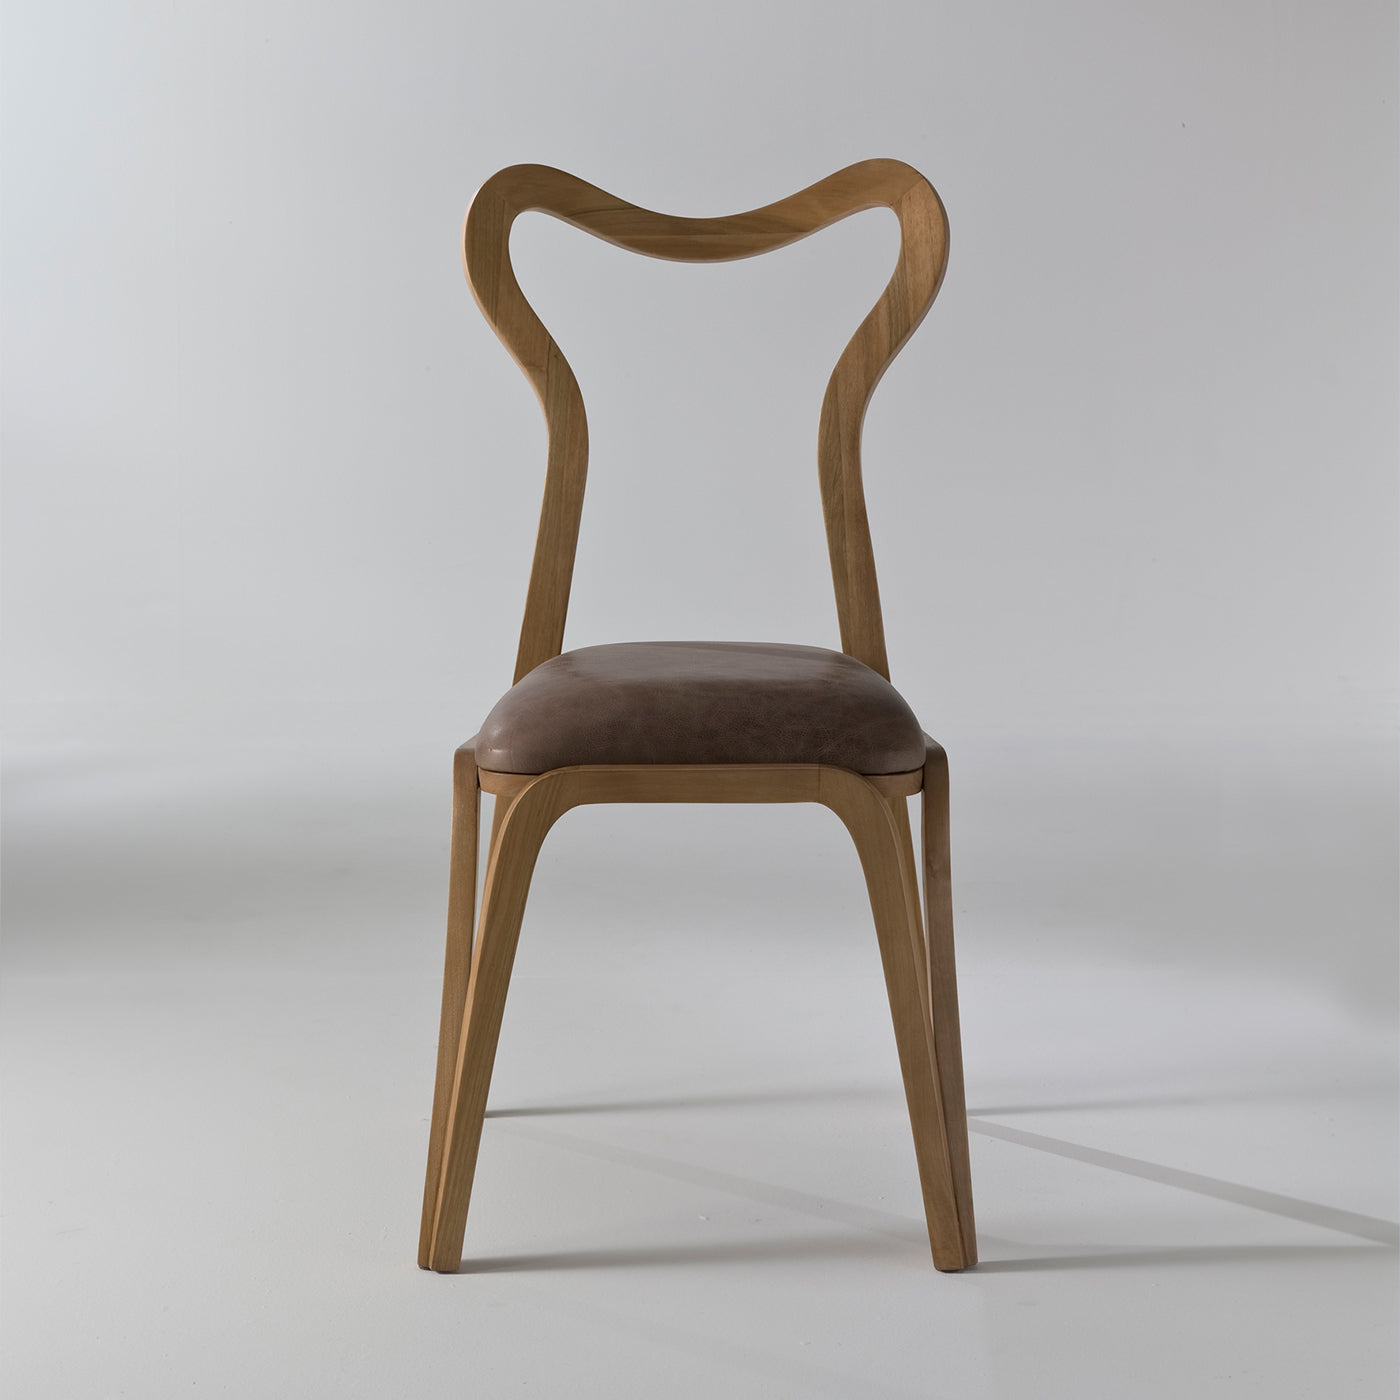 Daina Chair in Walnut with Open Back By Nigel Coates - Alternative view 1